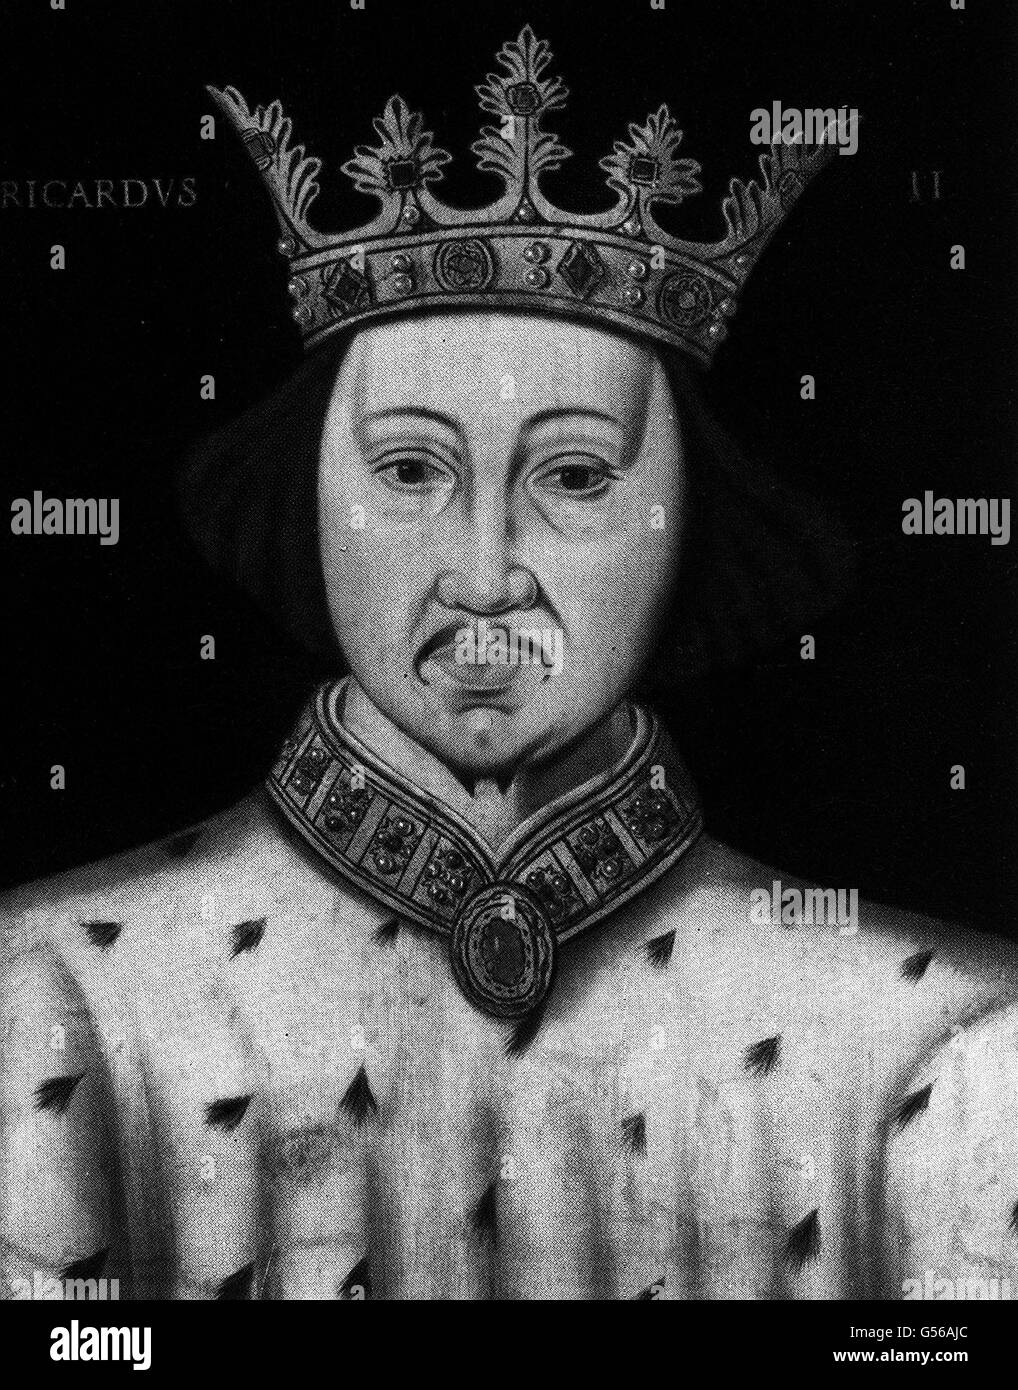 29/09/1399 - ON THIS DAY IN 1399 - King Richard II of England is forced to abdicate in favour of Henry Bolingbroke (Henry IV) 14/02/1400: On this day in 1400, the abdicated King Richard II is murdered in Pontefract Castle KING RICHARD II: A portrait of Richard of Bordeaux (1367-1400) as King of England (1377-1400). His reign was troubled by popular discontent (notably the Peasants' Revolt) and baronial opposition. He was forced to abdicate in favour of Henry Bolingbroke (later Henry IV) and died at Pontefract castle in mysterious circumstances. Stock Photo